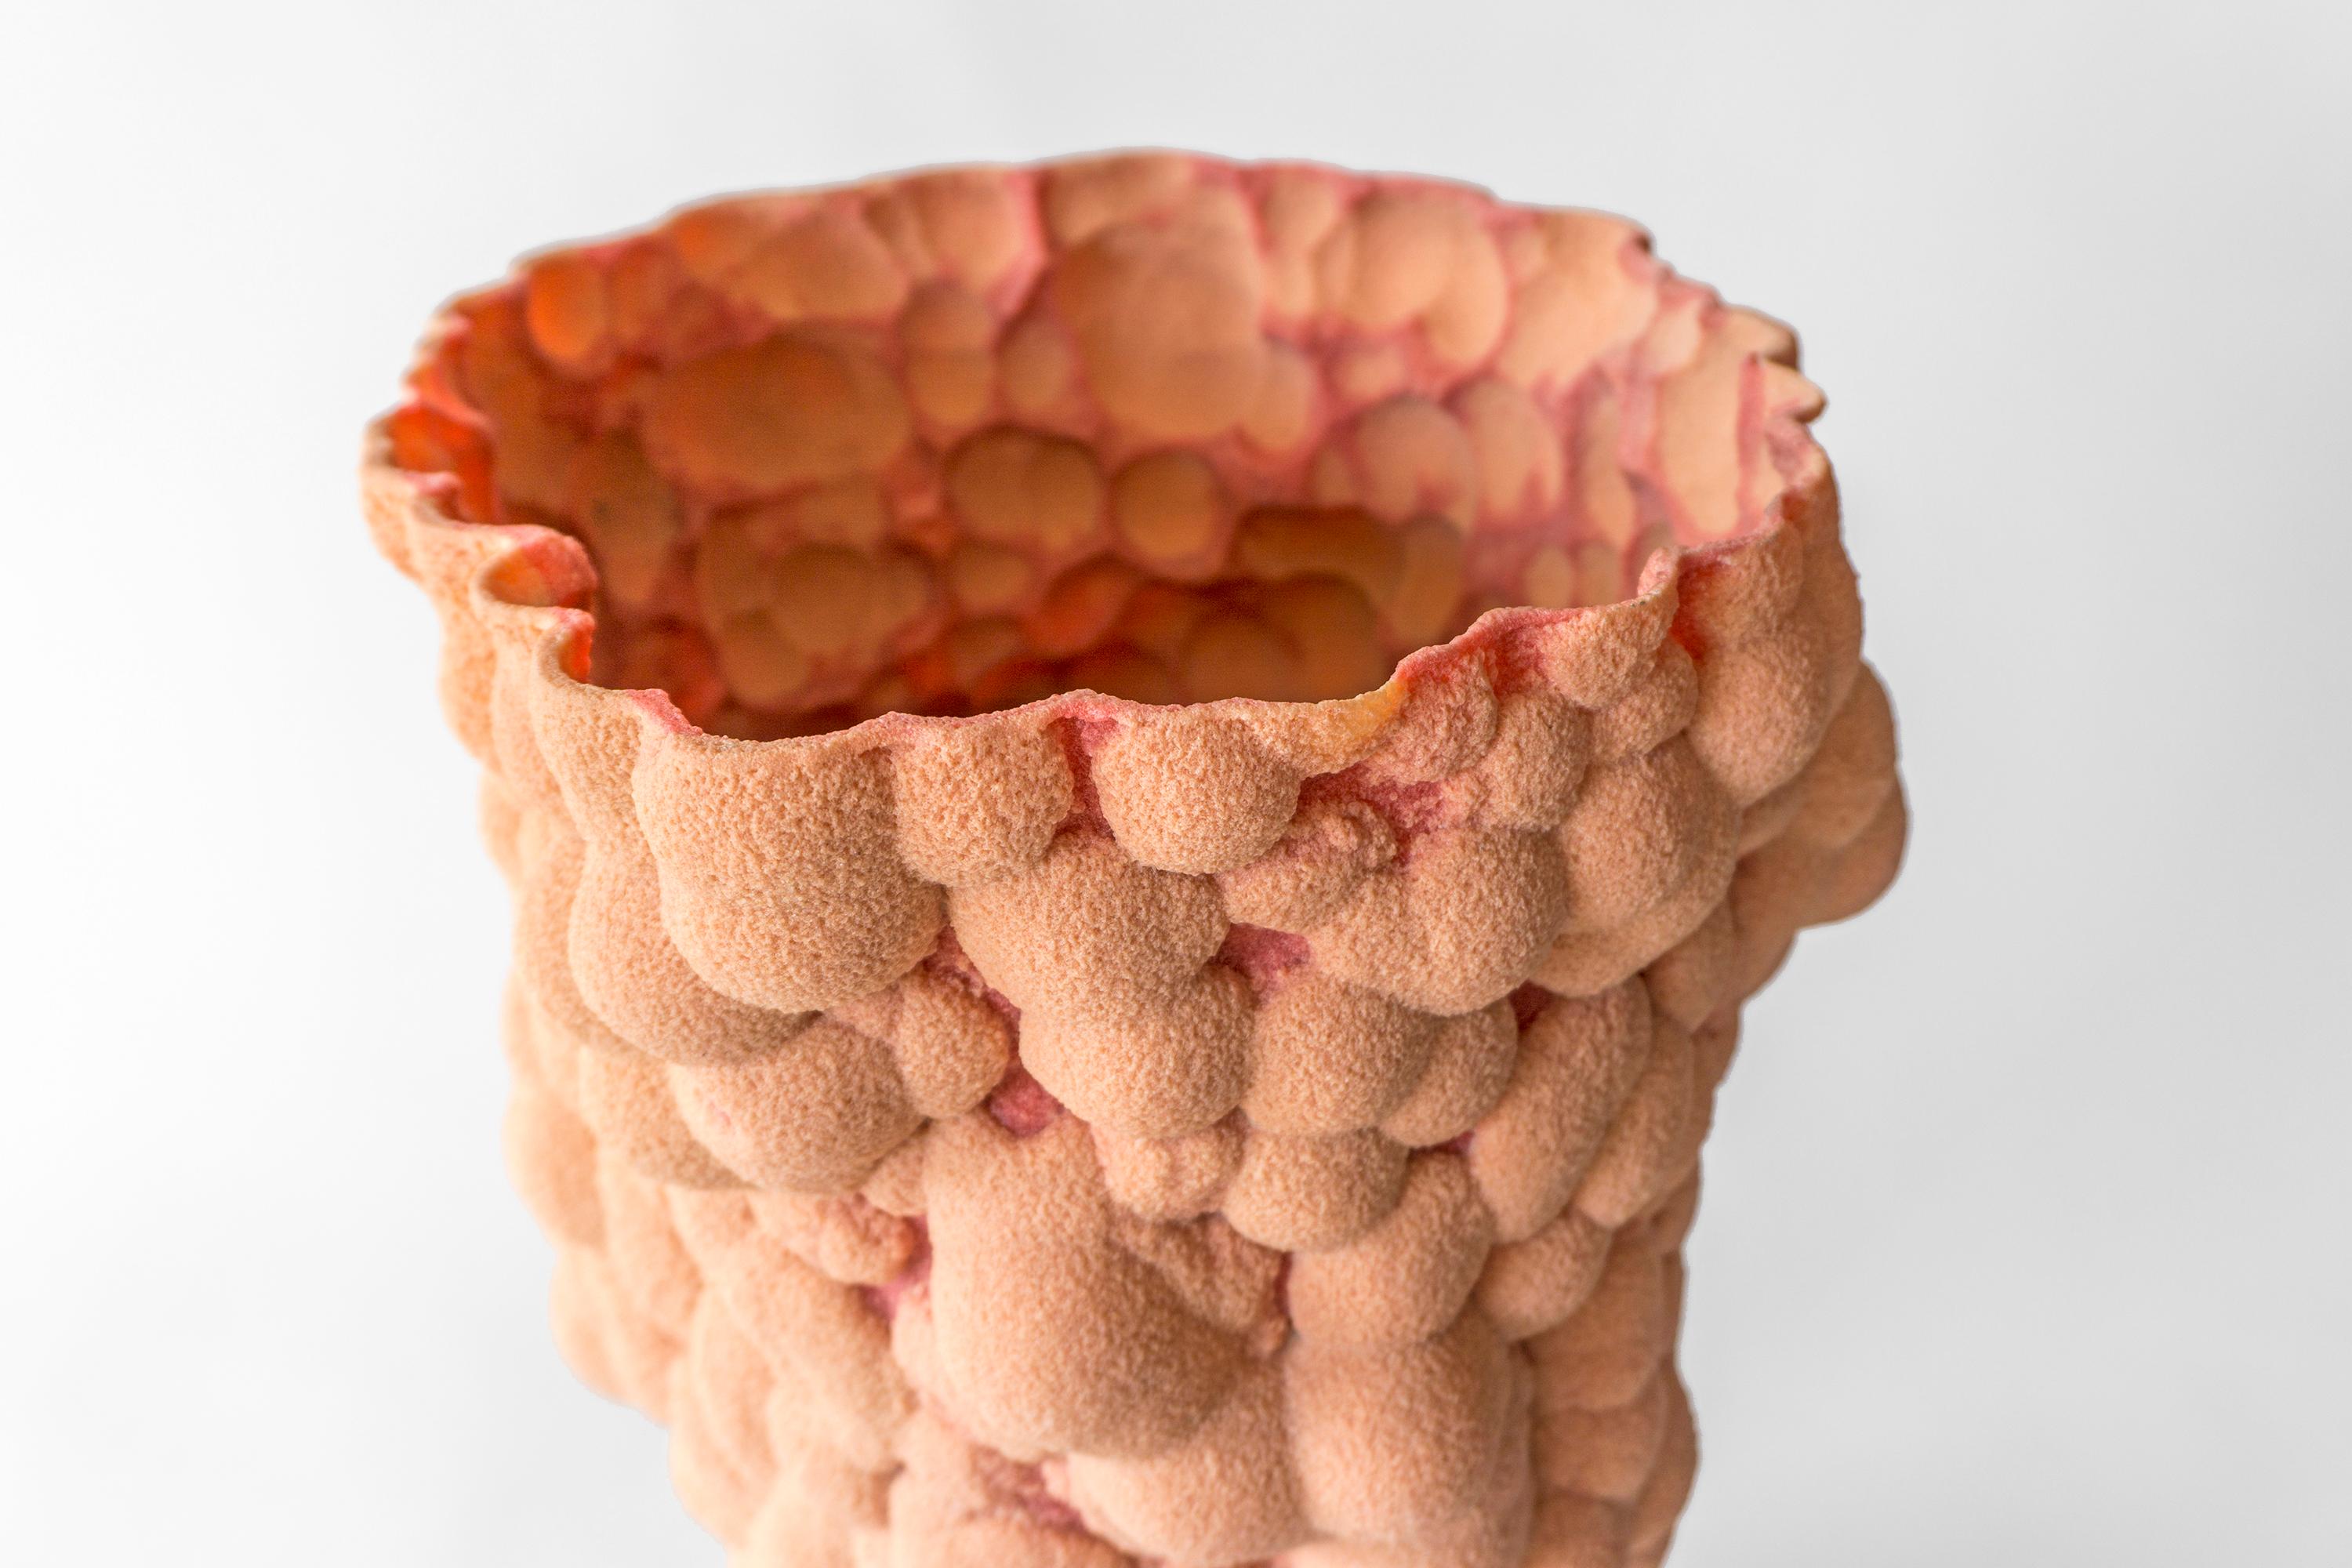 A vessel formed from Resin-Bonded Sand by Chicago designer Steven Haulenbeek. The RBS Series utilizes silica sand, a typically disposable industrial byproduct, to create colorful sculptural objects, furniture and lighting.

Steven Haulenbeek is an